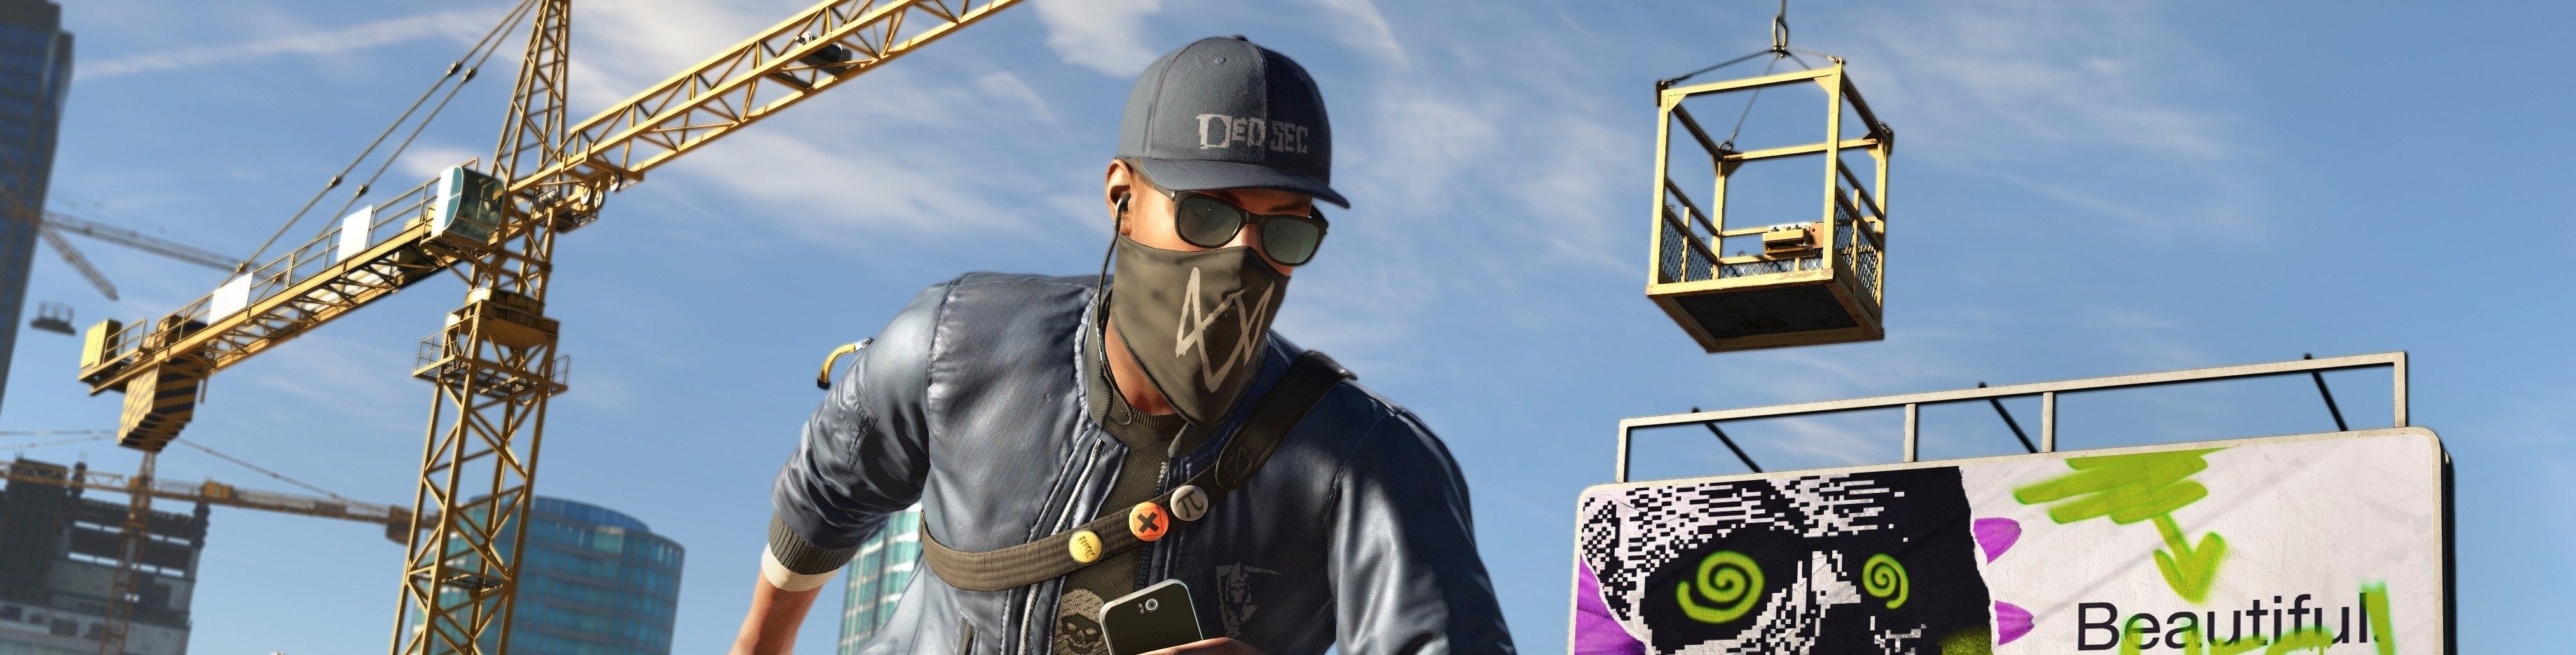 Image for Watch Dogs 2: "There are no towers"